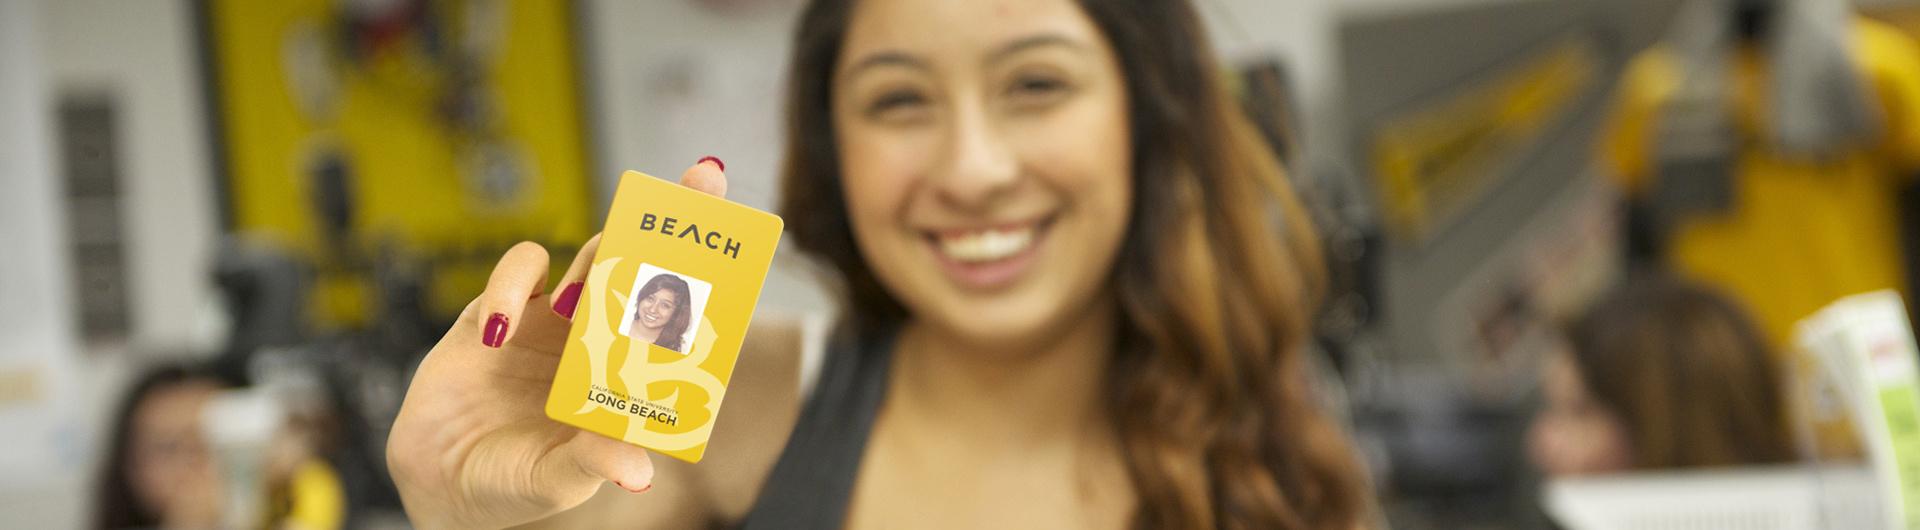 Student Holding a CSULB ID Card